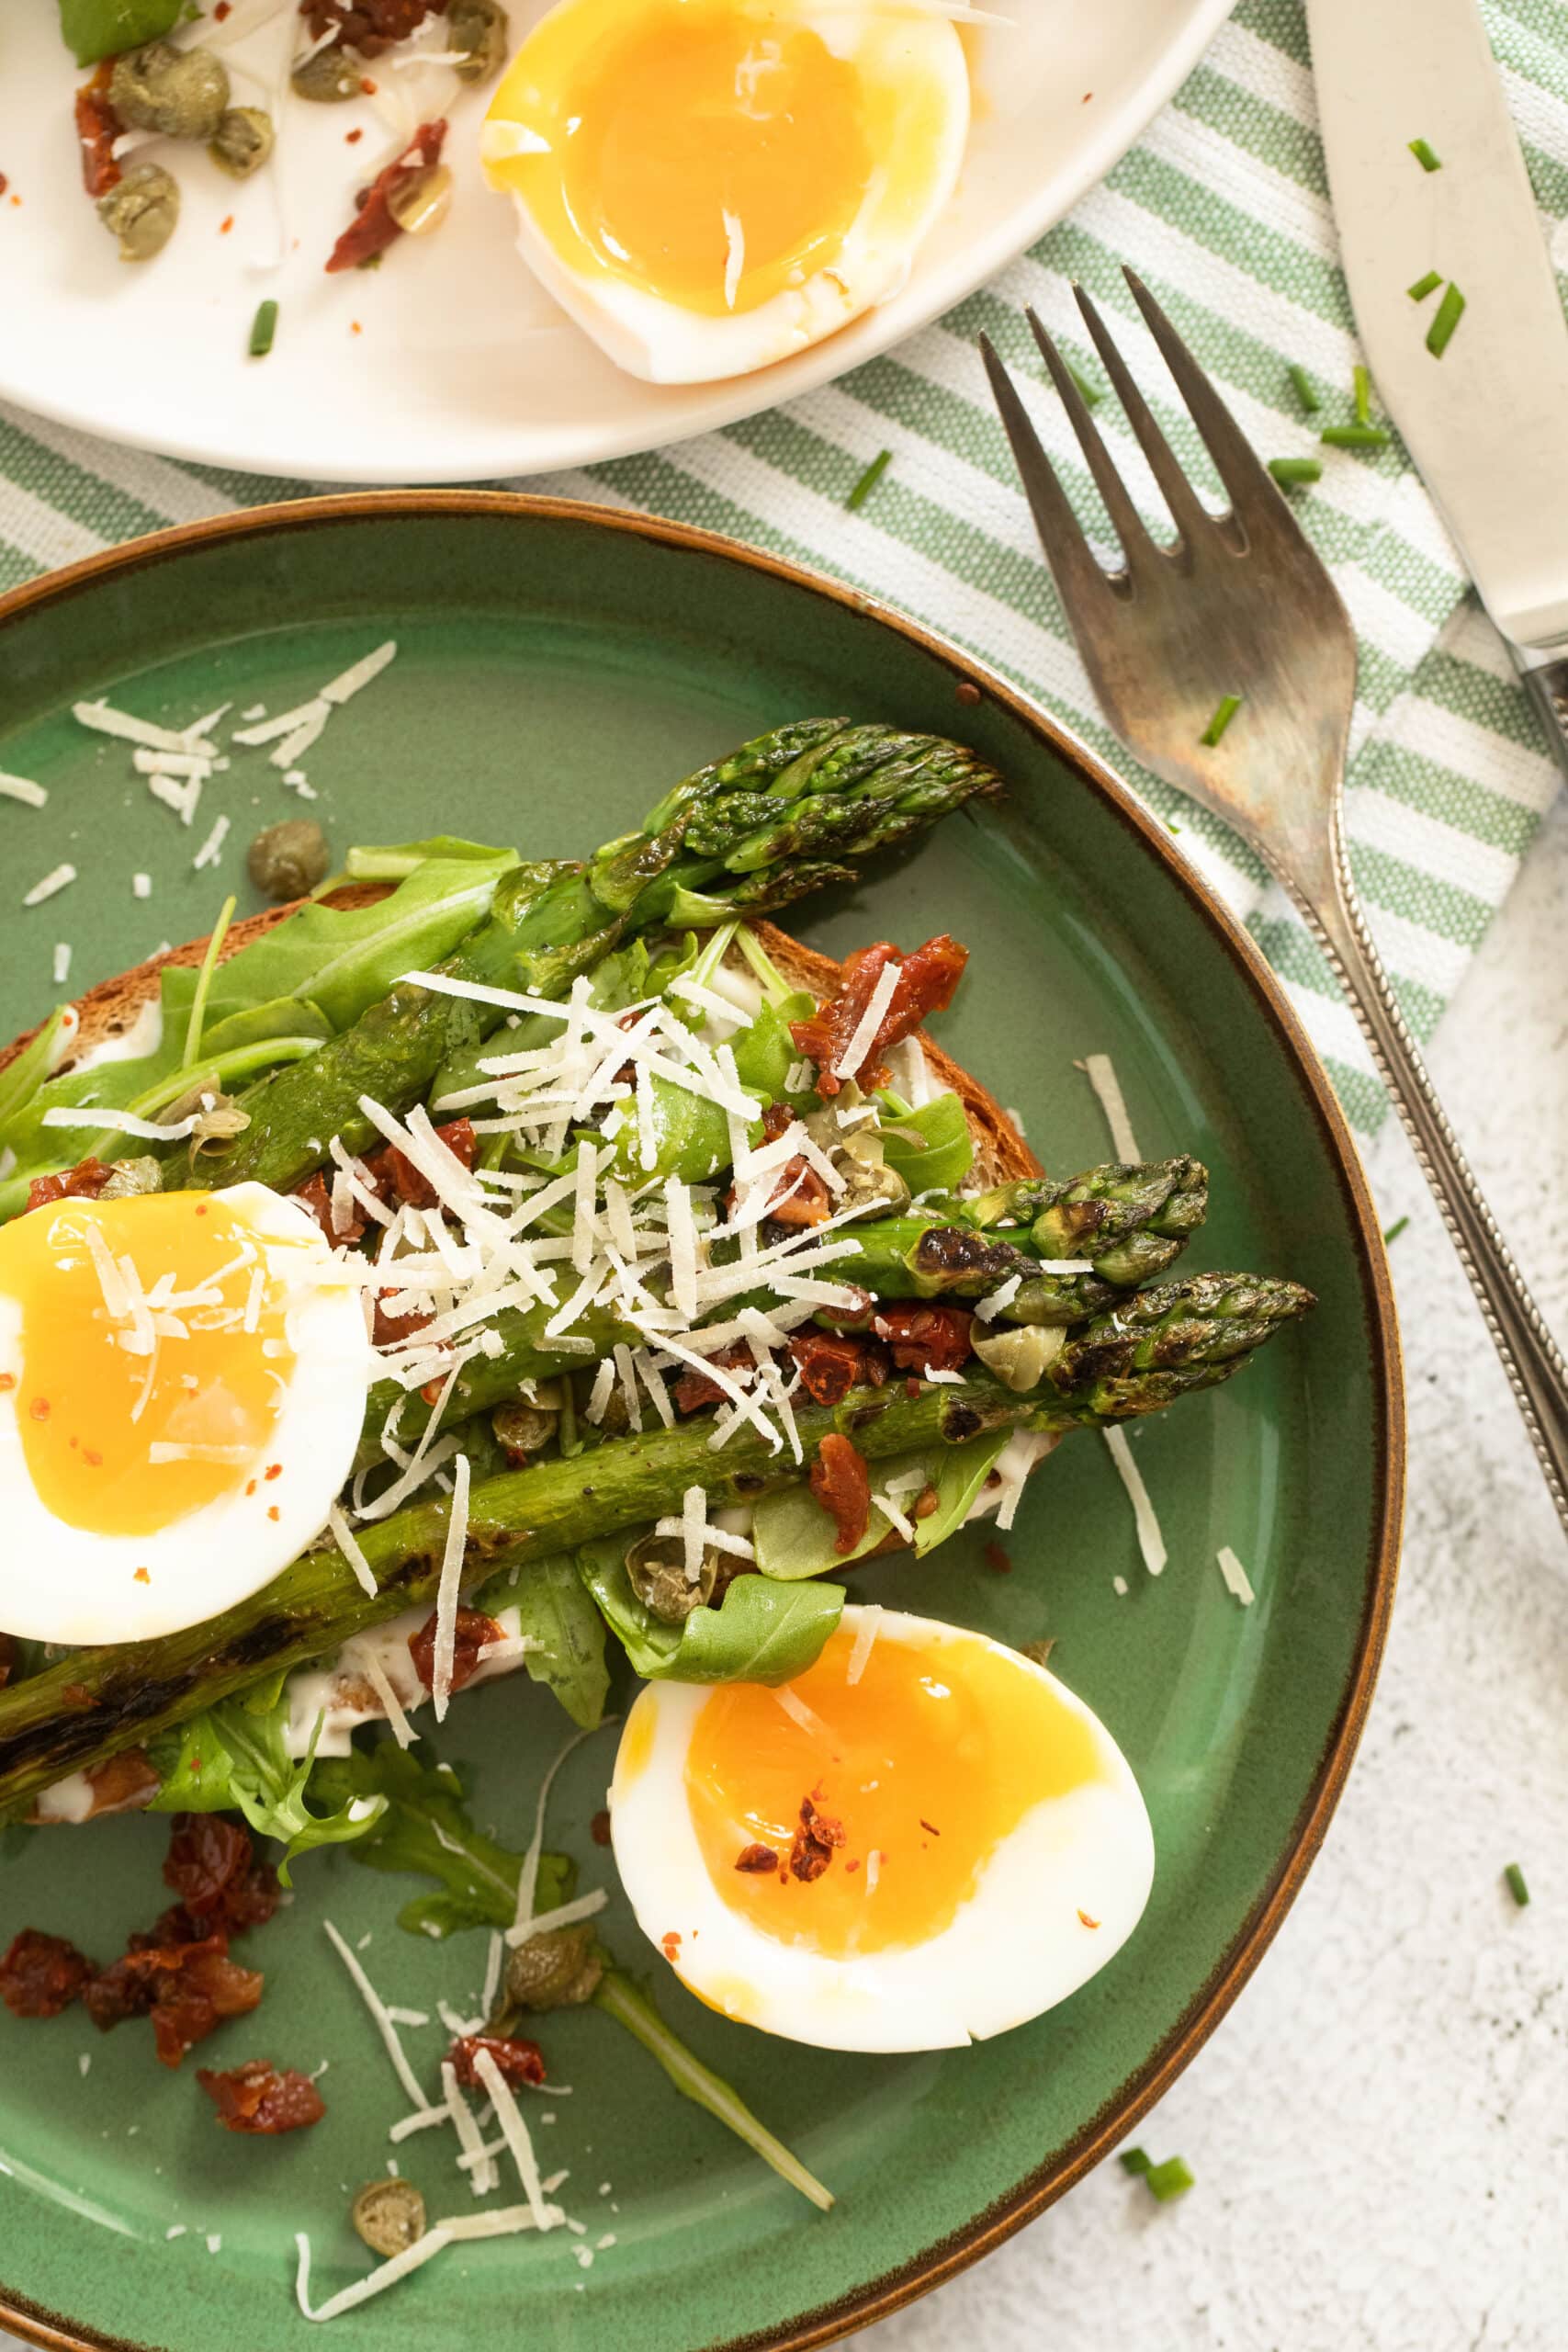 asparagus and eggs with sun-dried tomatoes and parmesan on a green plate.